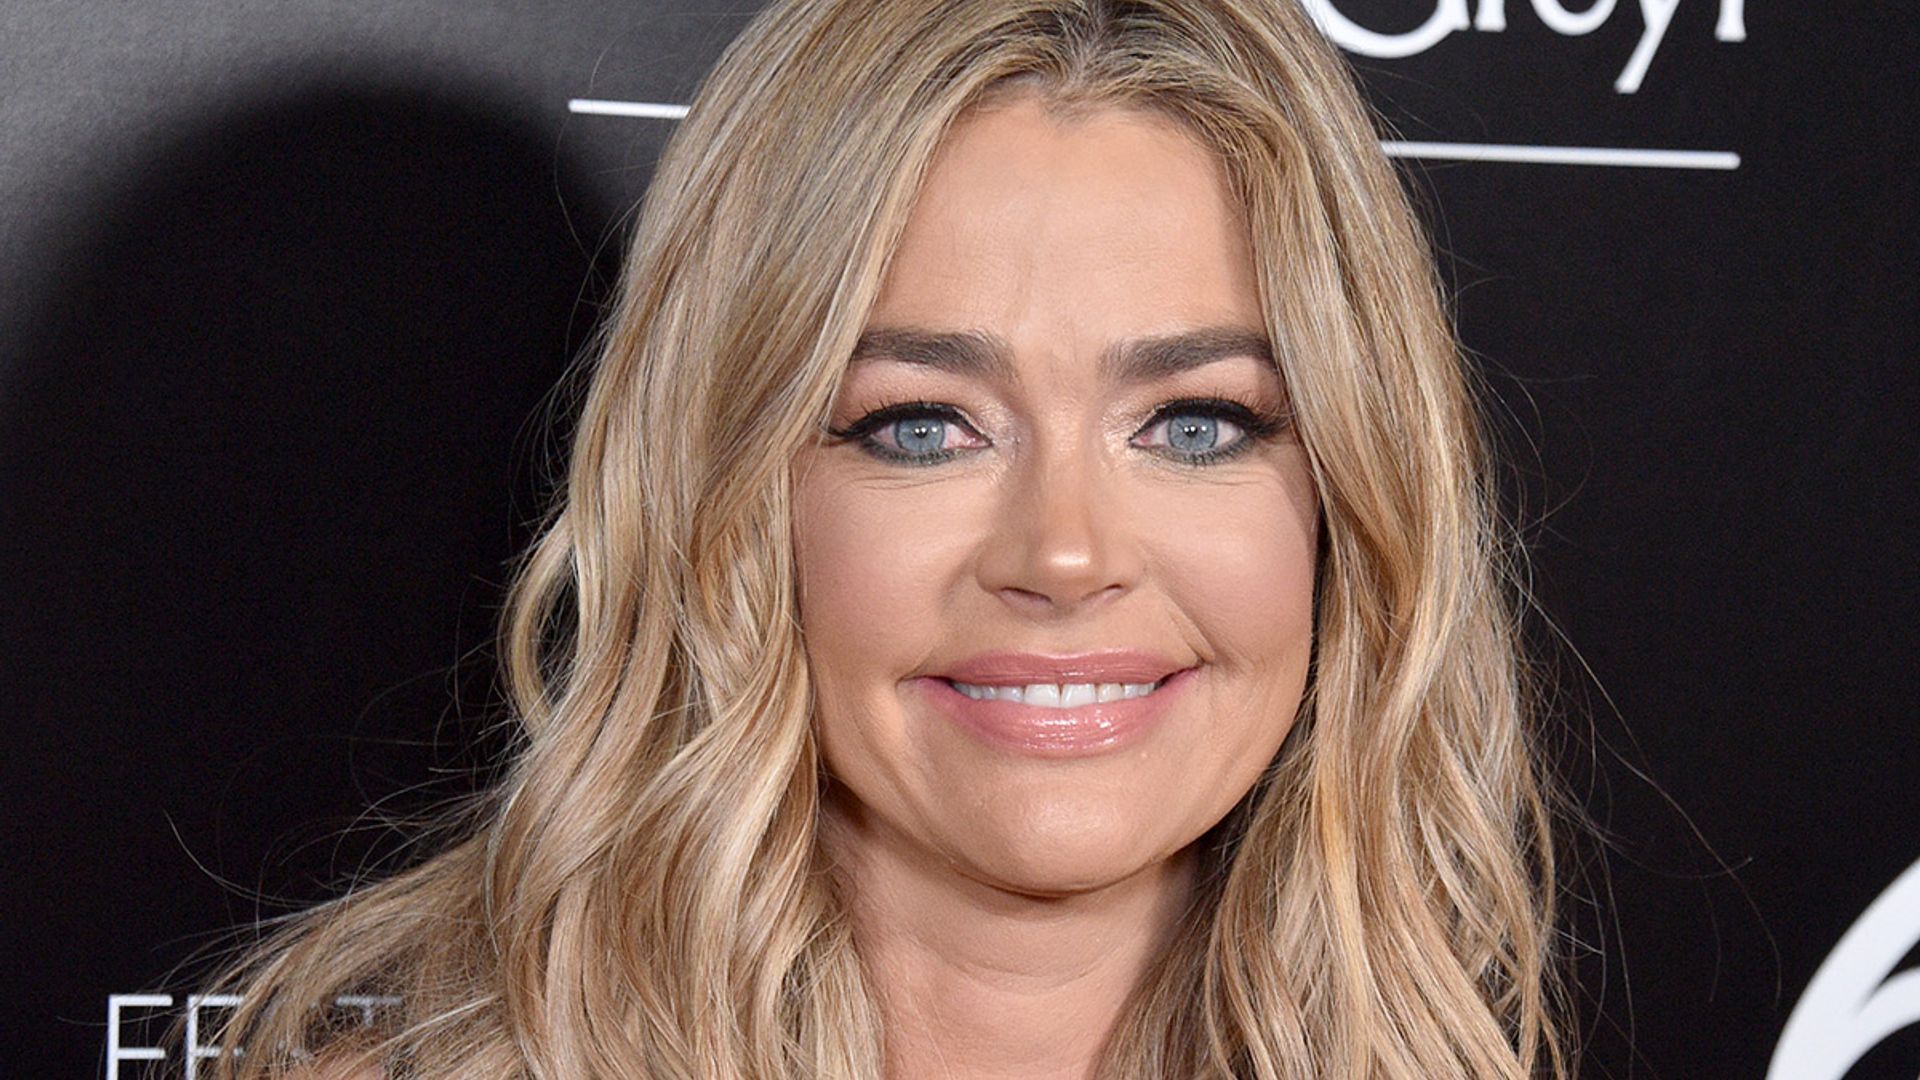 Ageless Denise Richards, 52, shows off her incredible body in